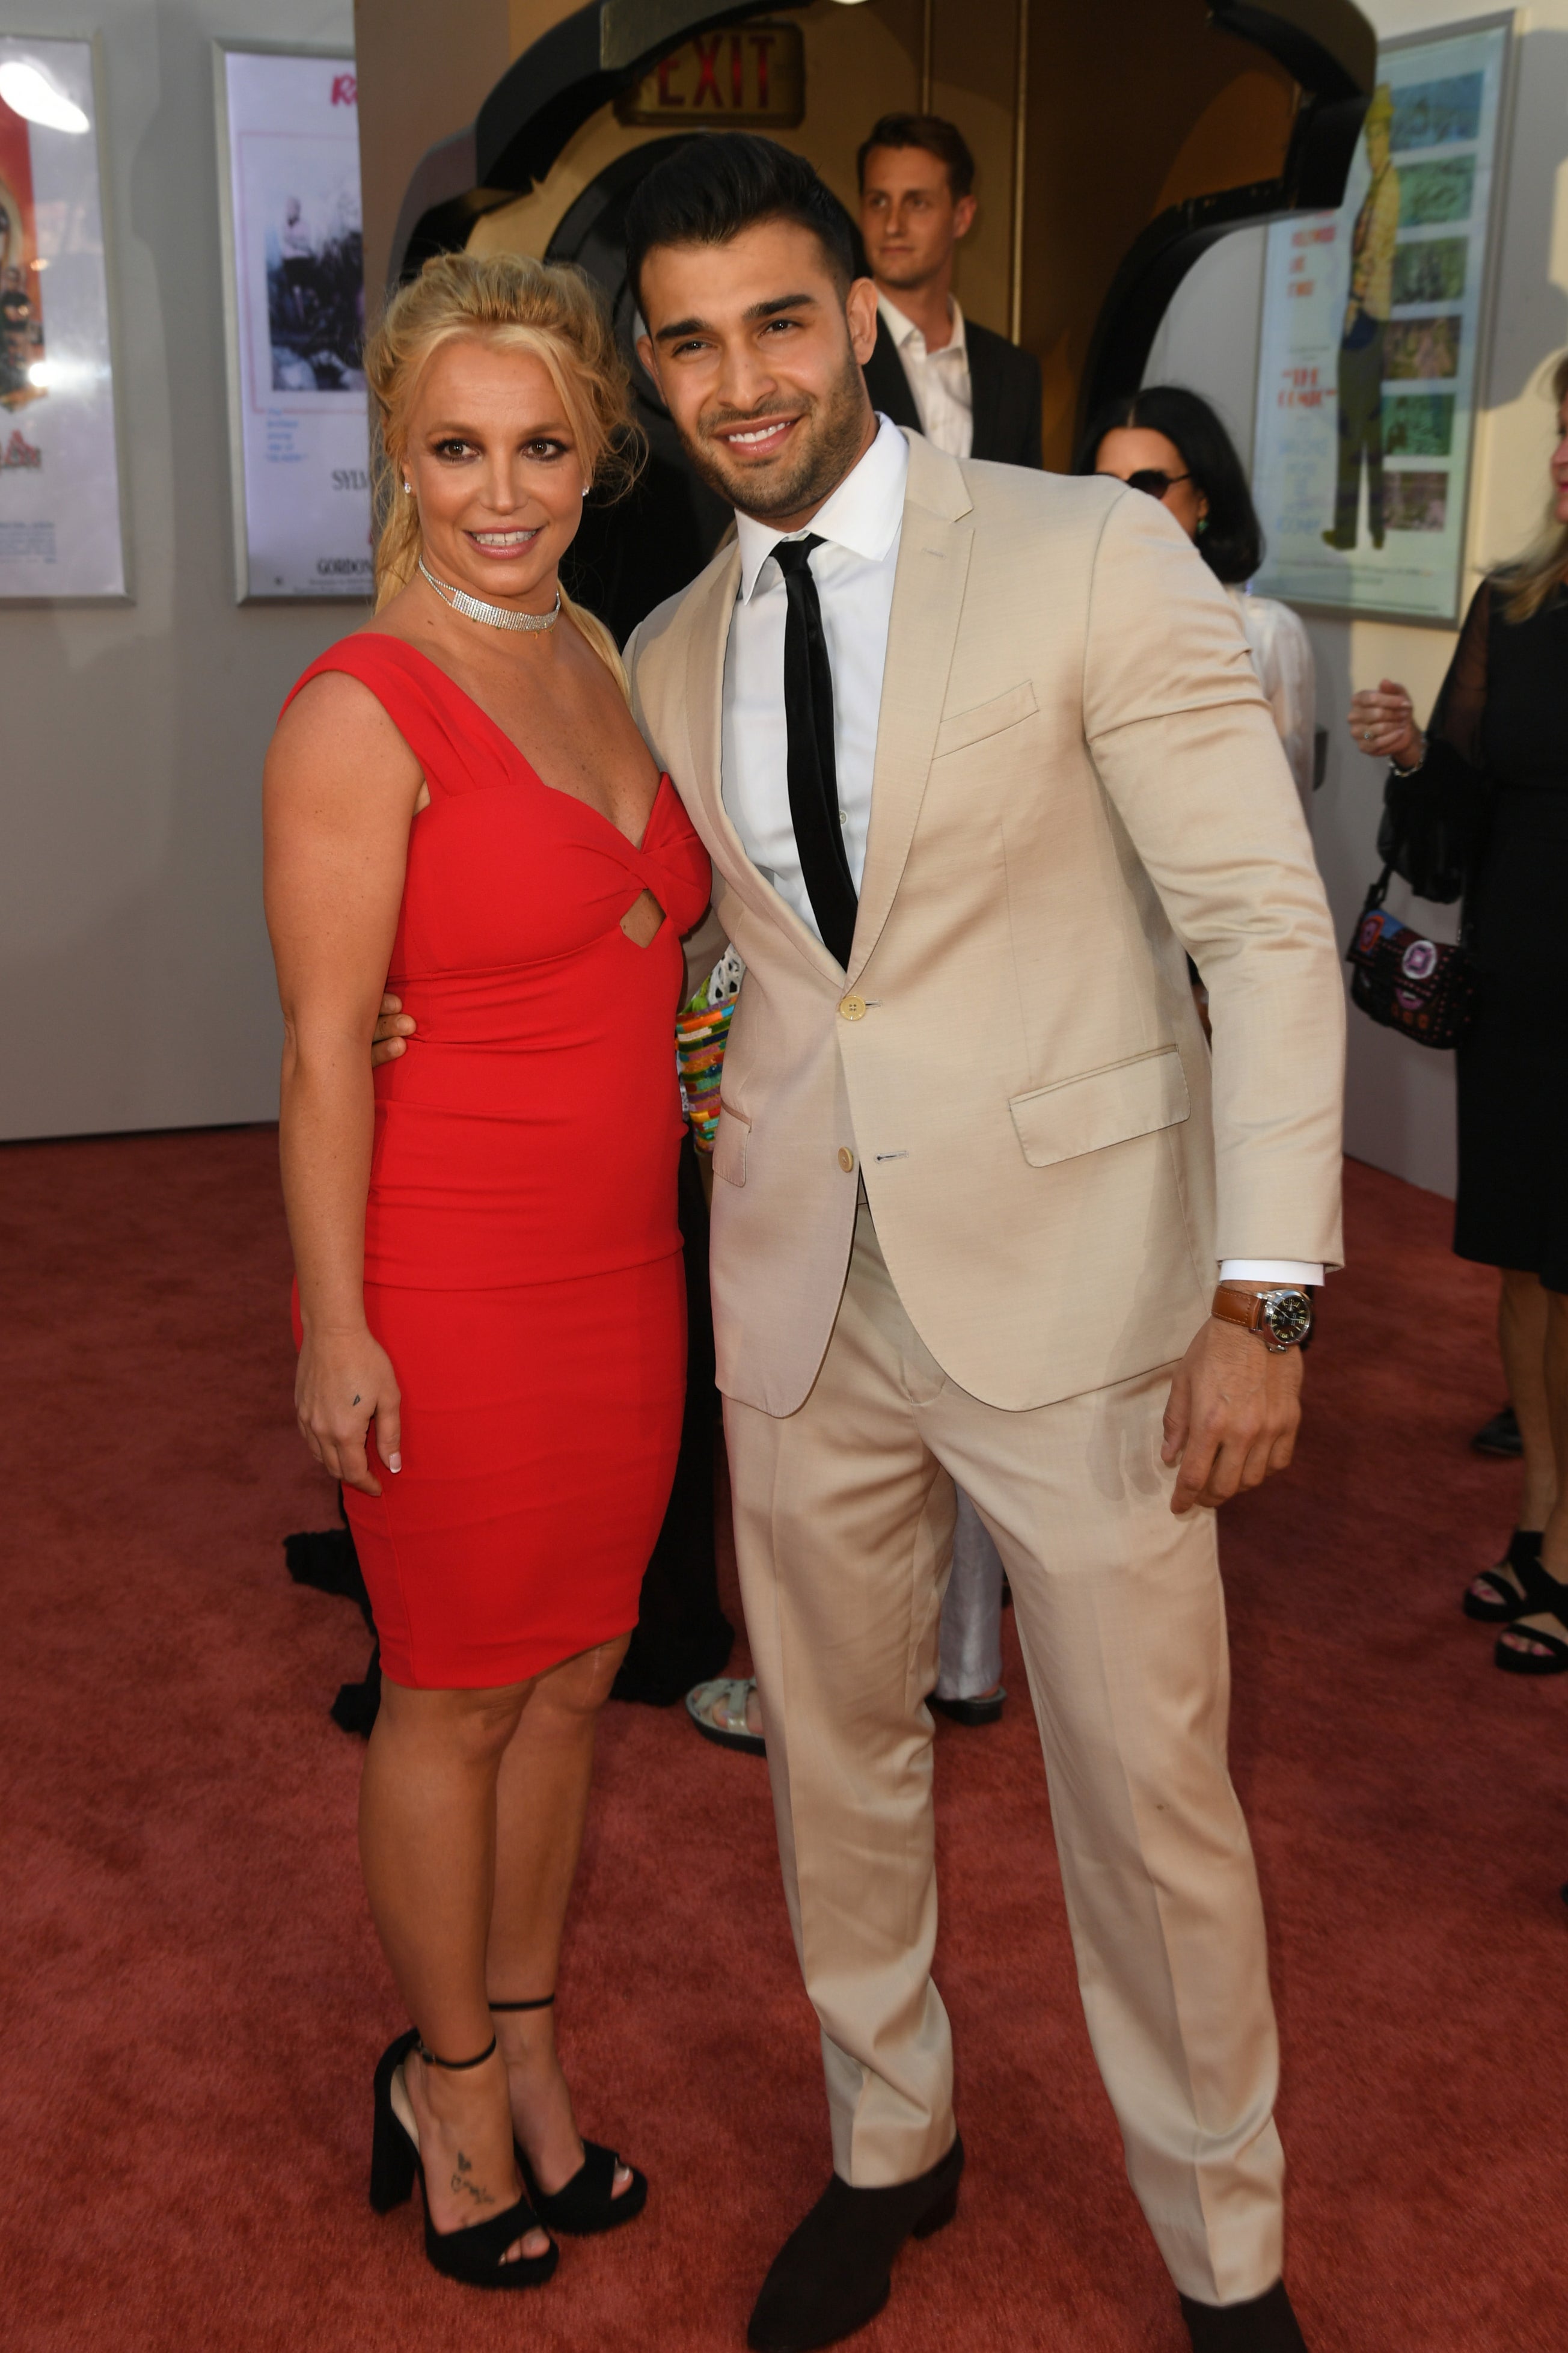 Britney says she’s being prevented from marrying her boyfriend Sam Asghari